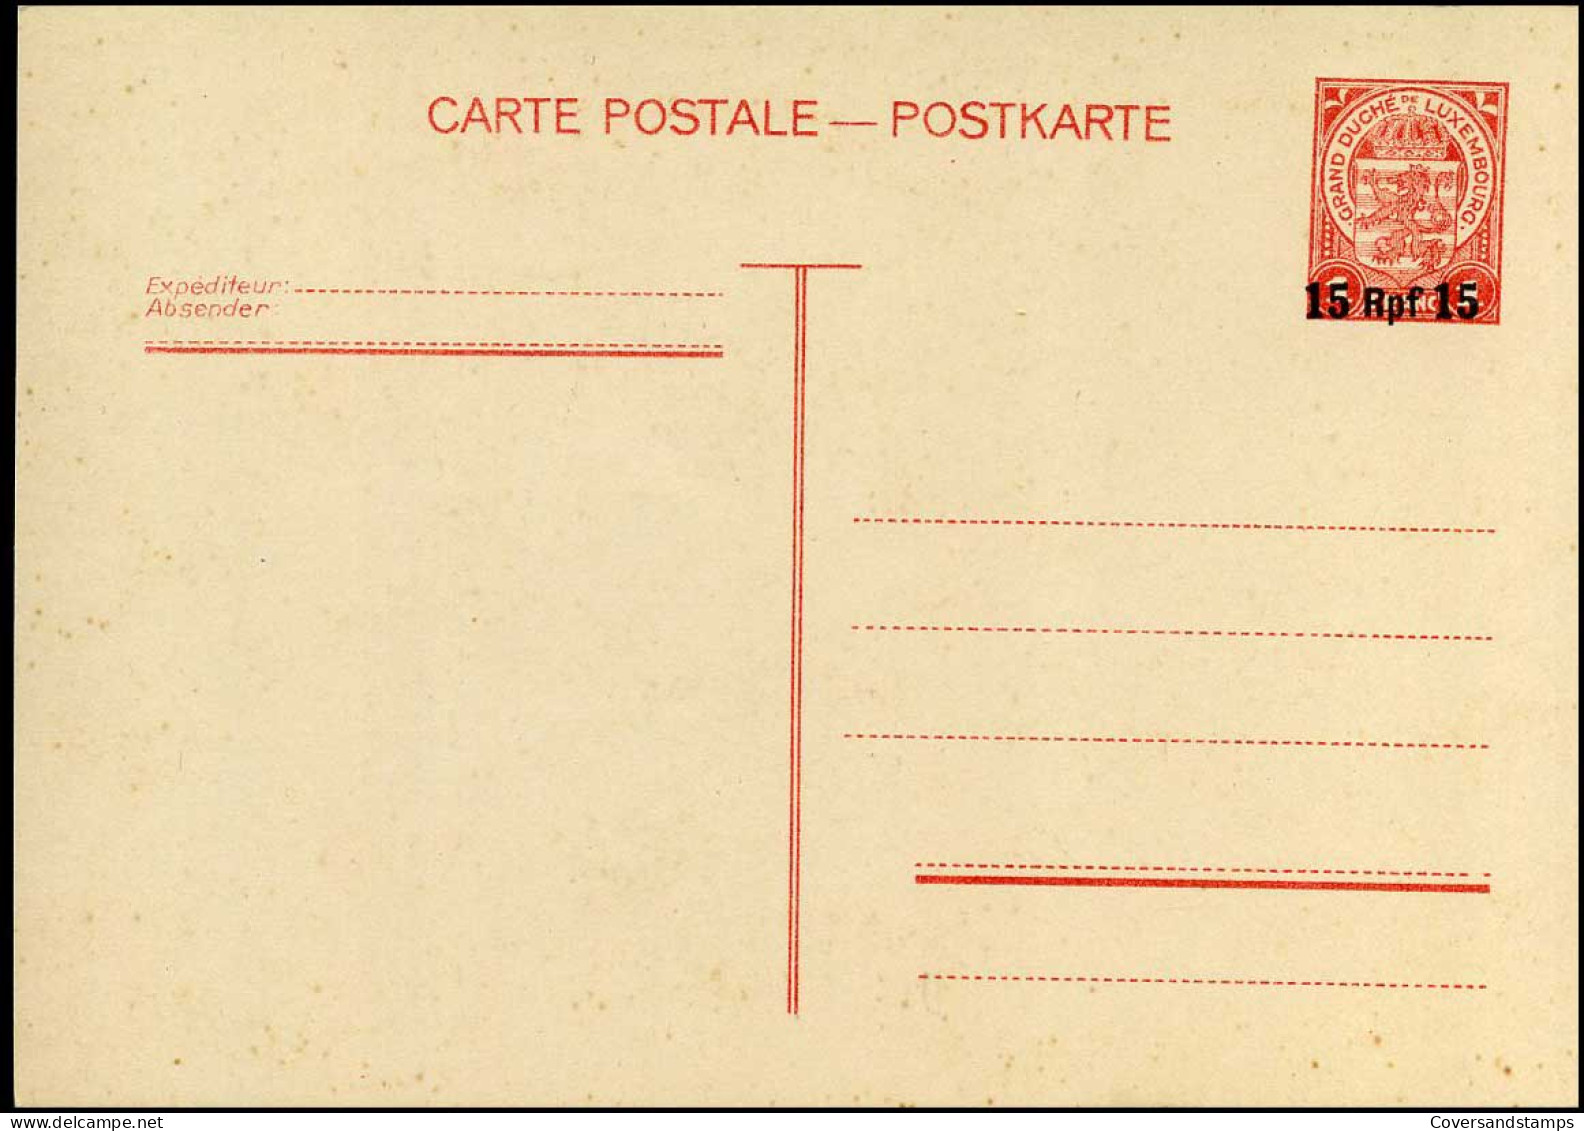 Luxembourg - Post Card - 15 Rpf On 1 Franc - Entiers Postaux